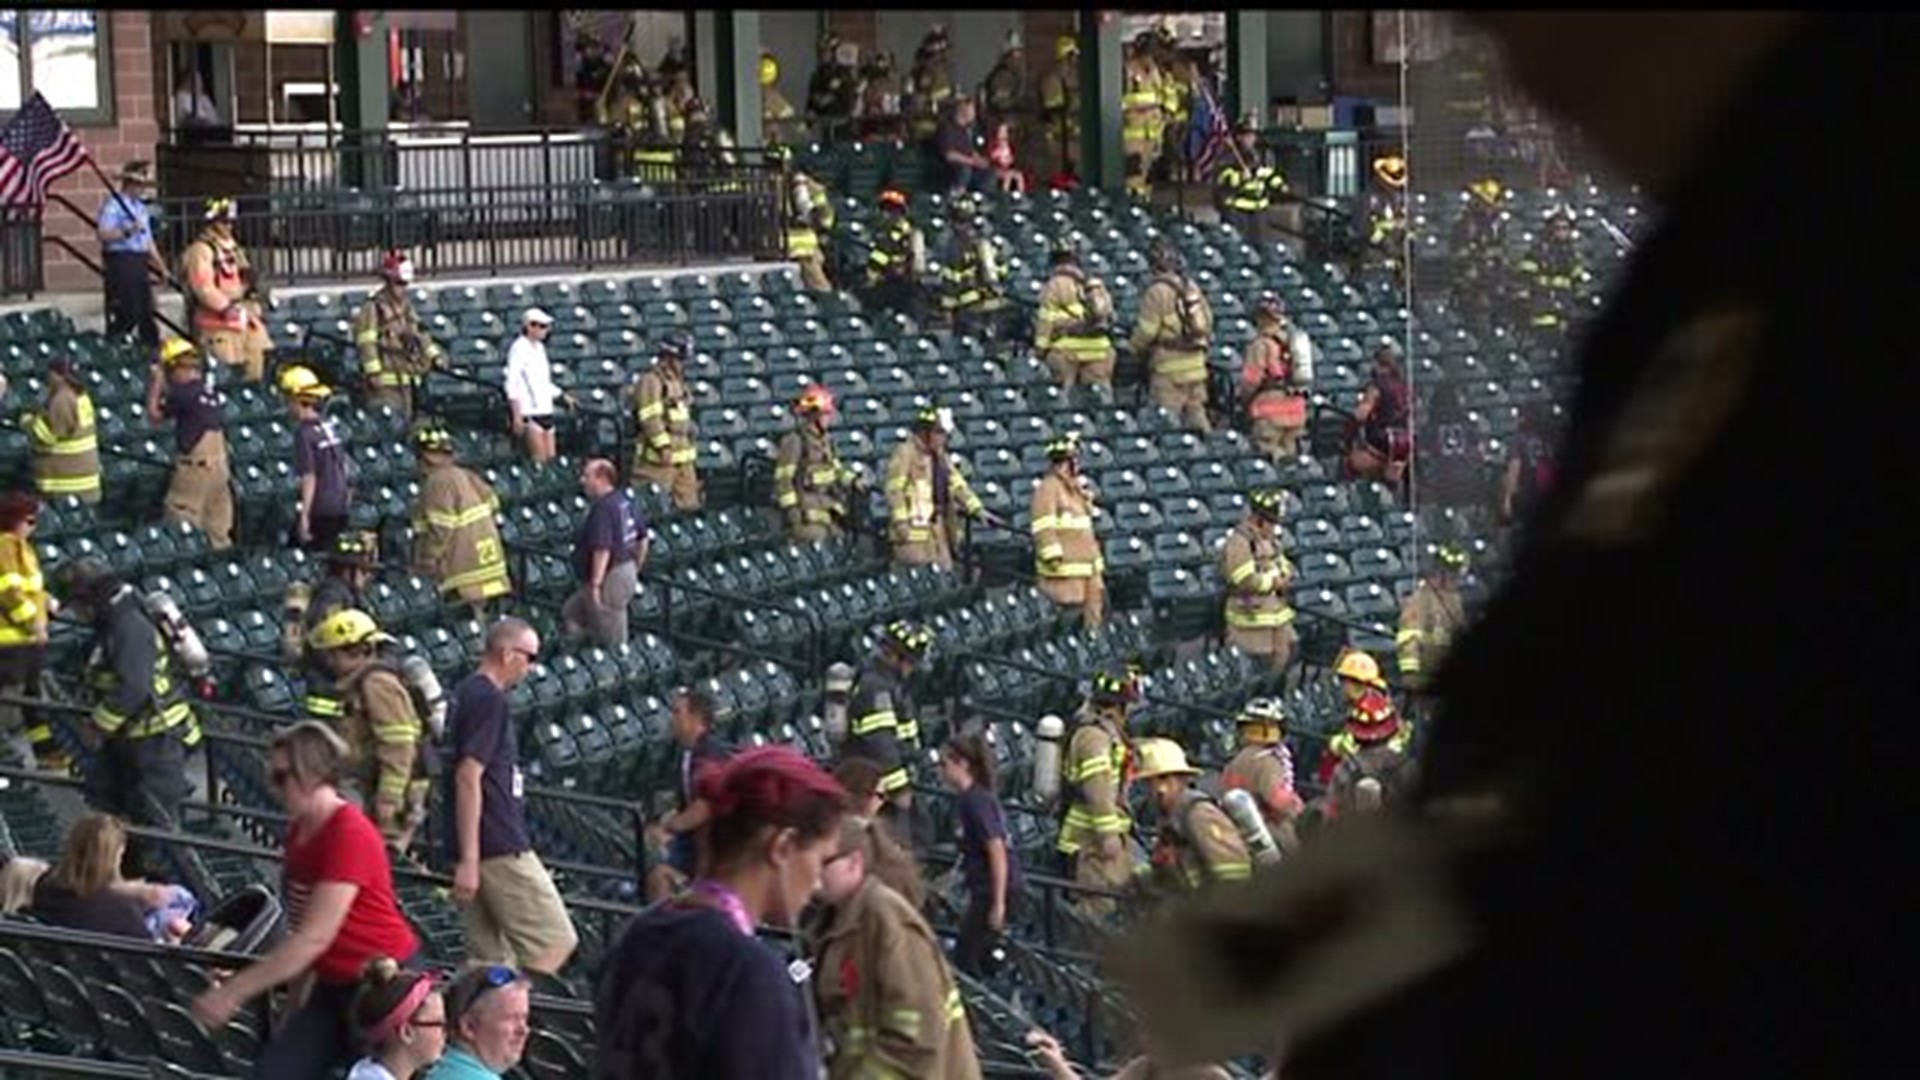 Remembering firefighters lost in 9/11 with memorial stair climb